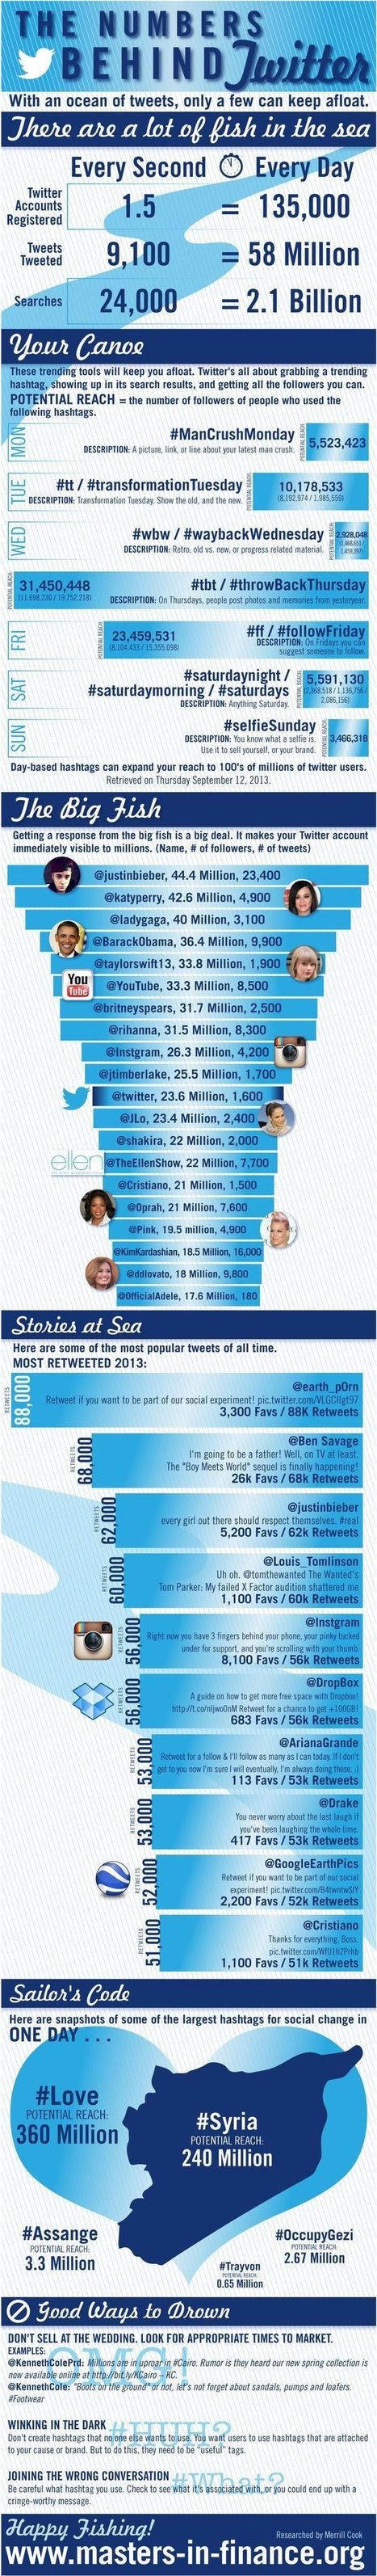 The Numbers behind Twitter | #Social Media #Infographic | Information Technology & Social Media News | Scoop.it